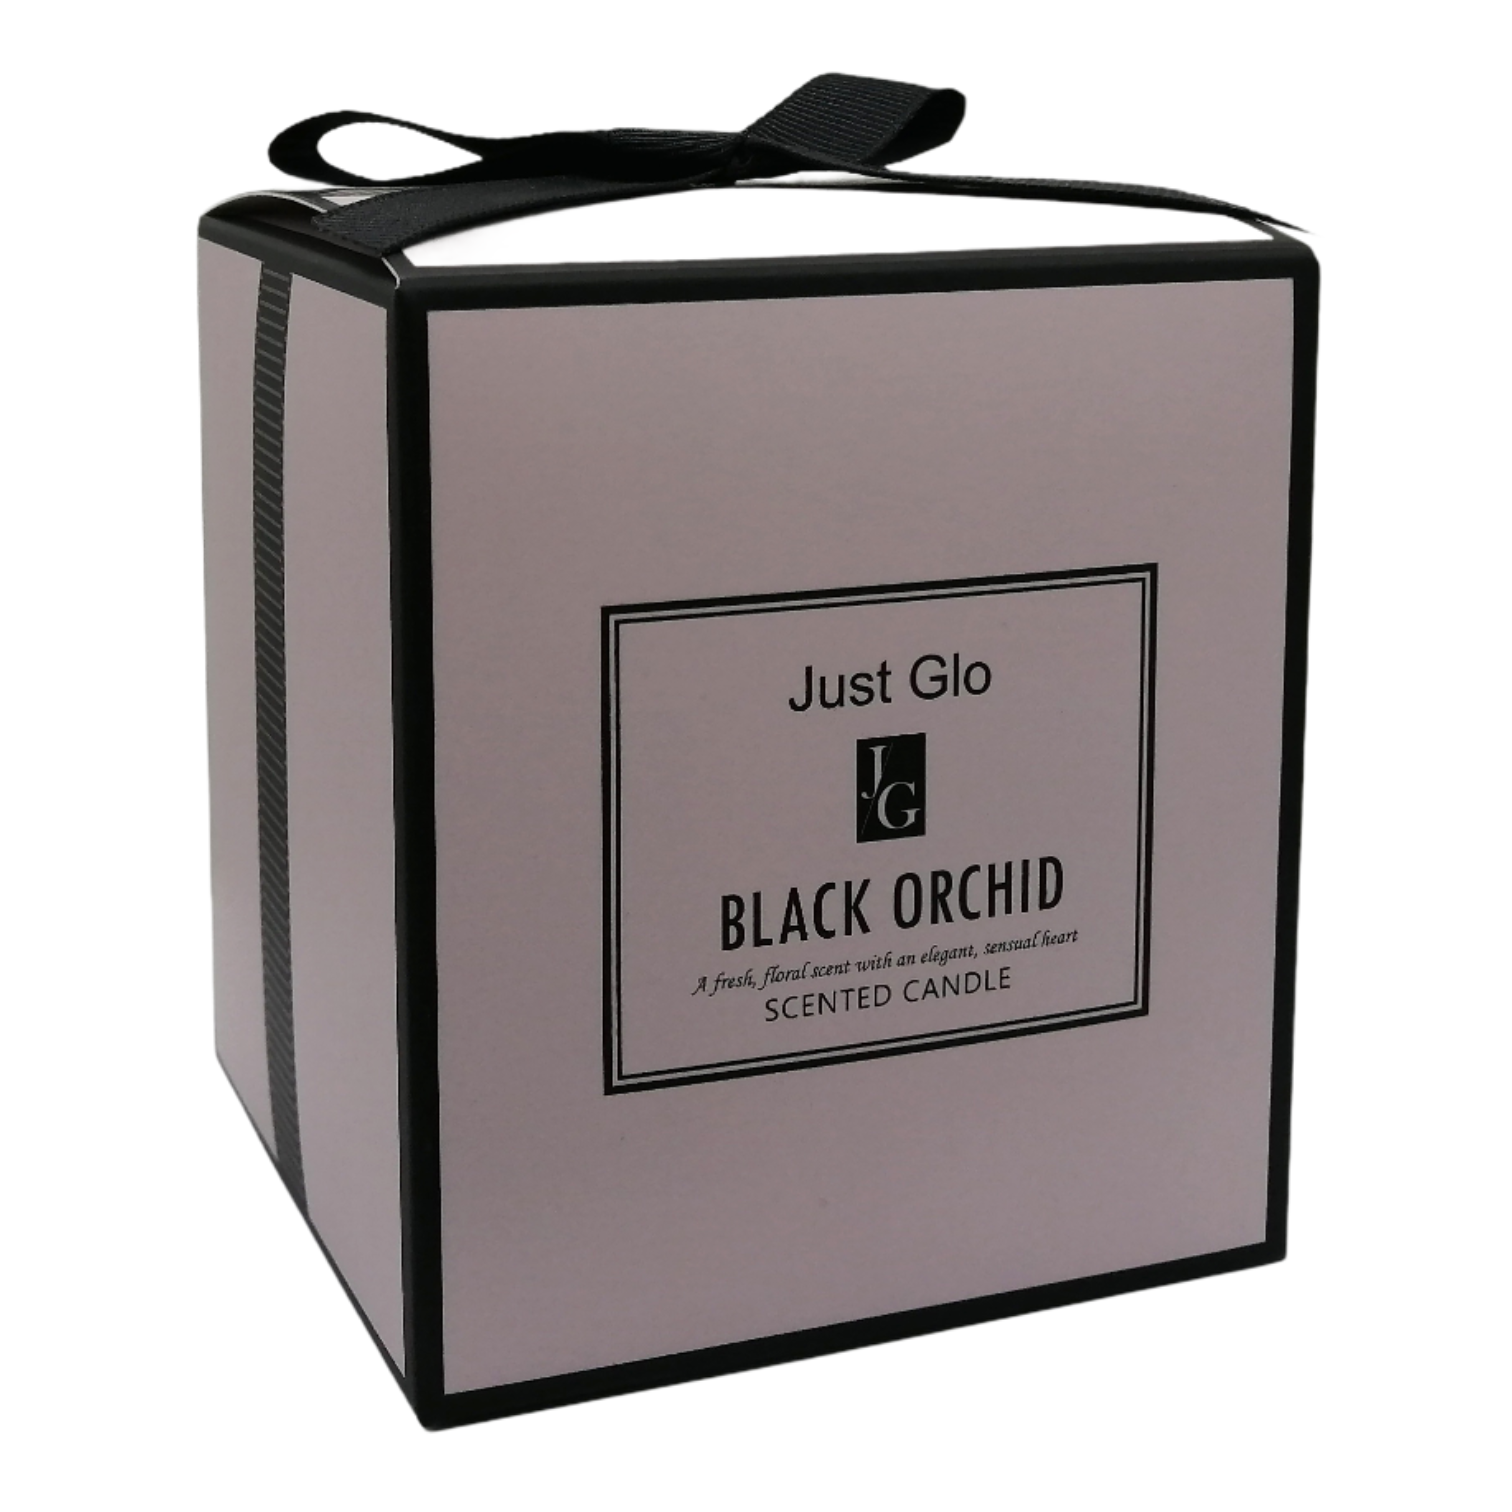 Just Glo Candle Black Orchid 140g Image